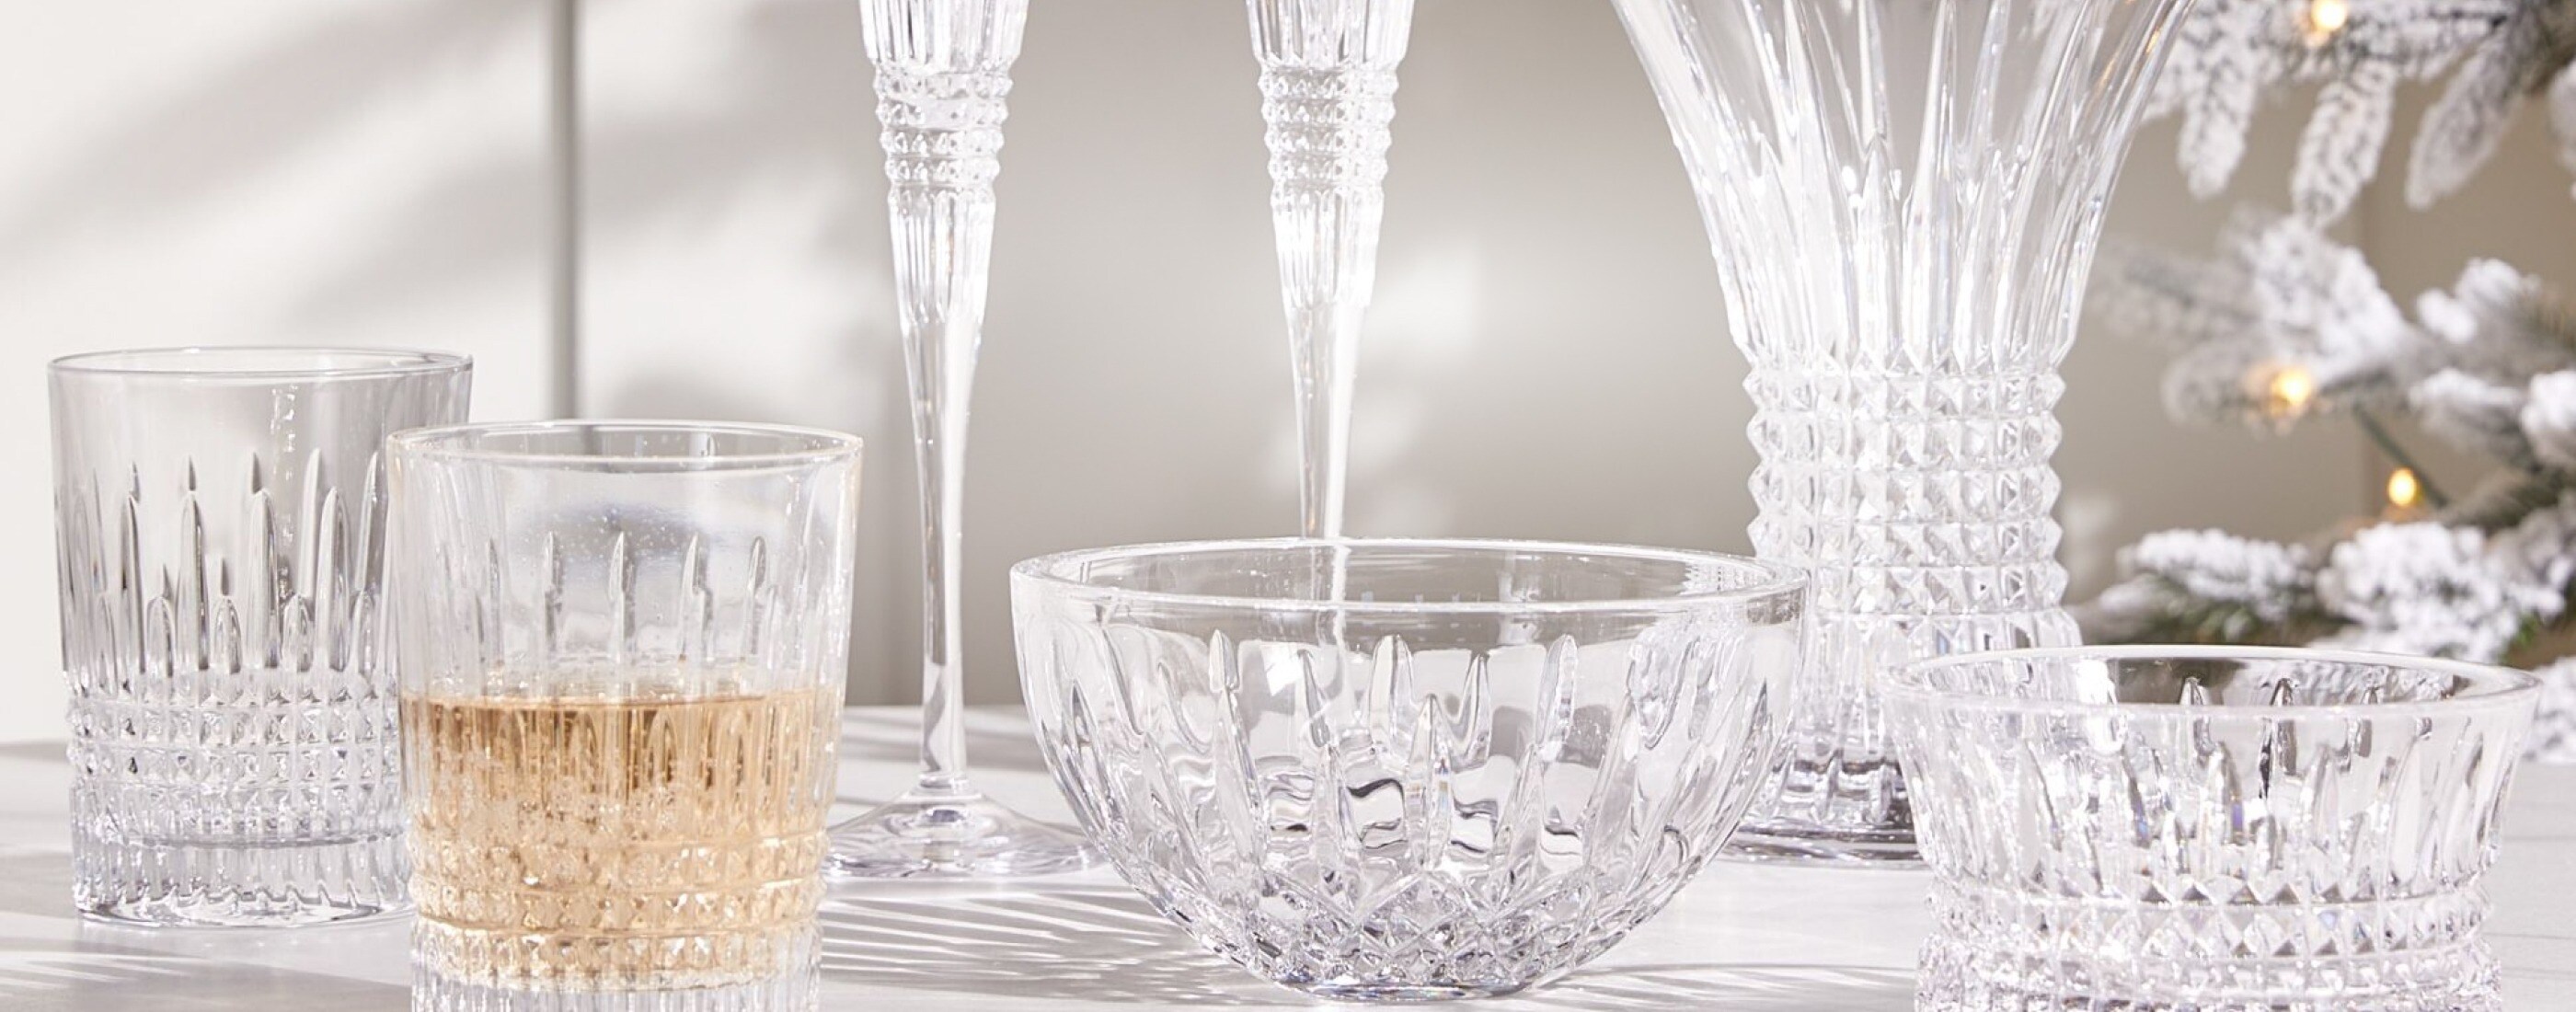 A closeup display of crystal bowls, tumblers, champagne flutes, and vases on a white tablecloth.